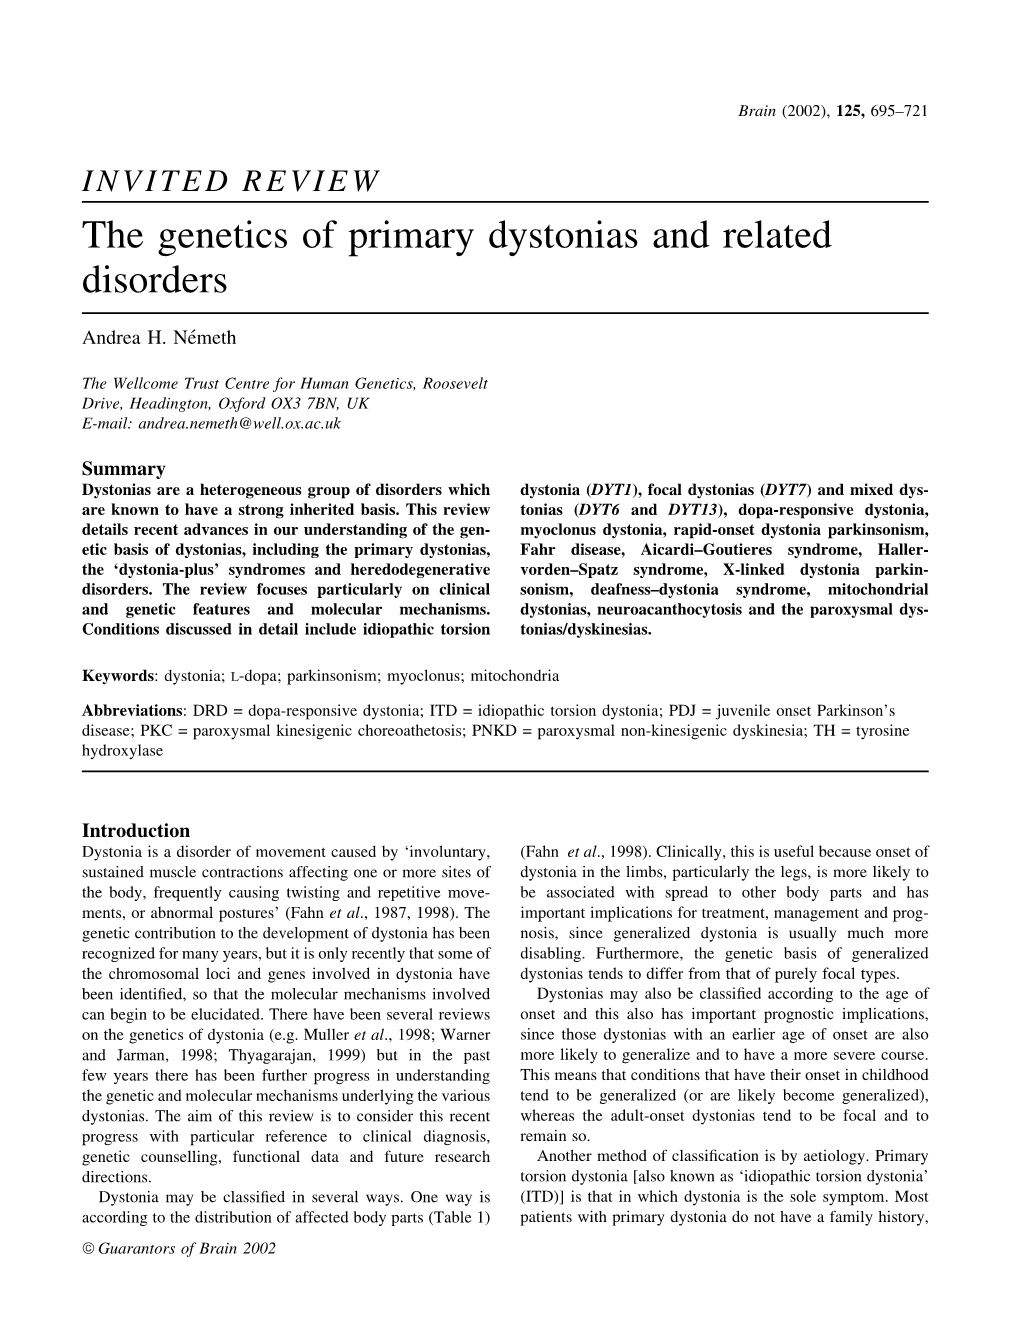 The Genetics of Primary Dystonias and Related Disorders